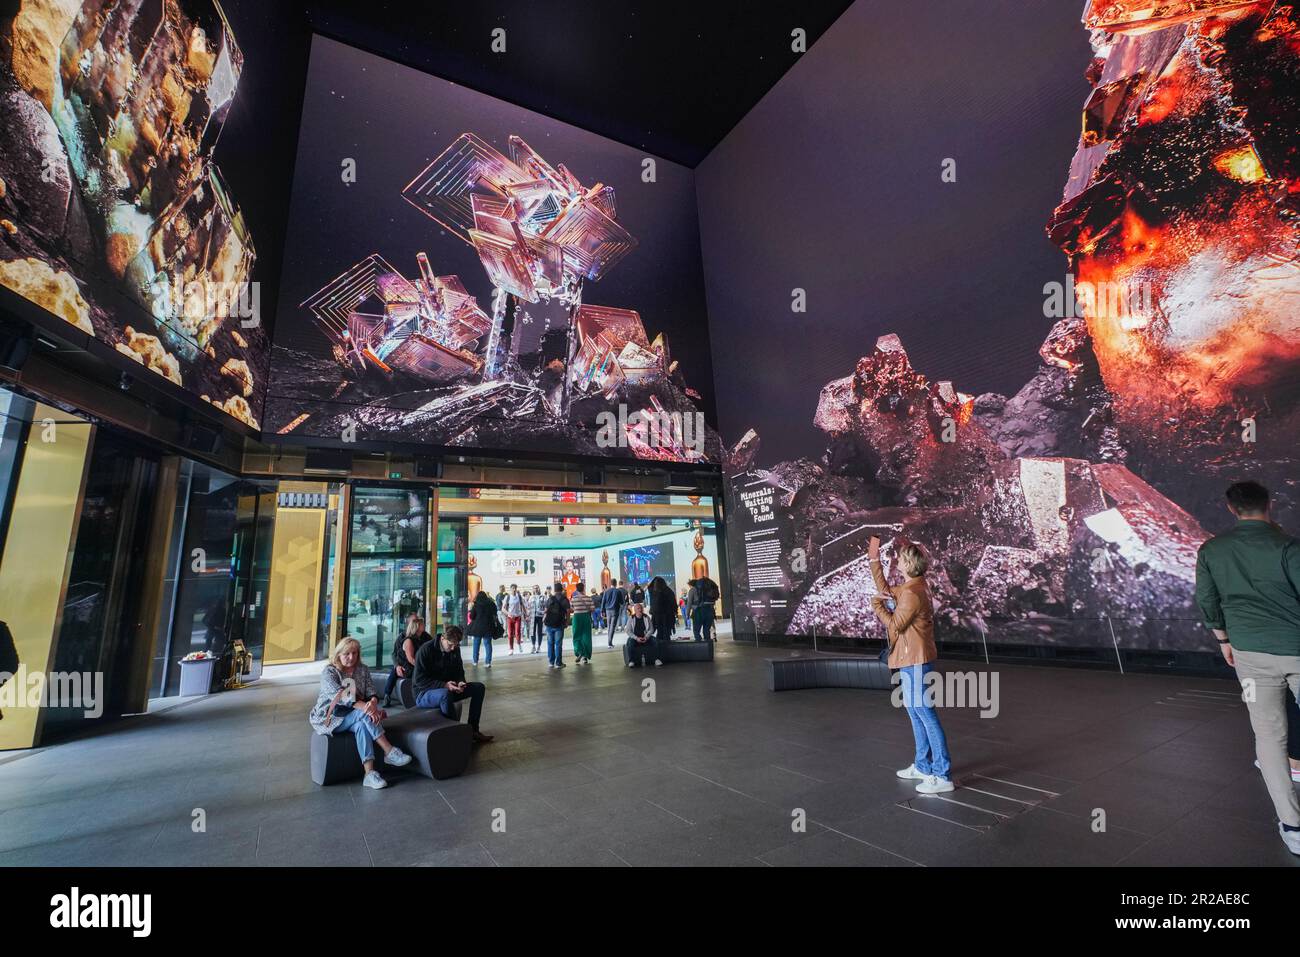 London UK. 18 May 2023  .A visual installation  Waiting To Be Found in  3D by Dan Hoopert shown  at the Outernet near Tottenham Court Road in London  on   huge, 360 degree, 8k resolution screens. Credit: amer ghazzal/Alamy Live News Stock Photo